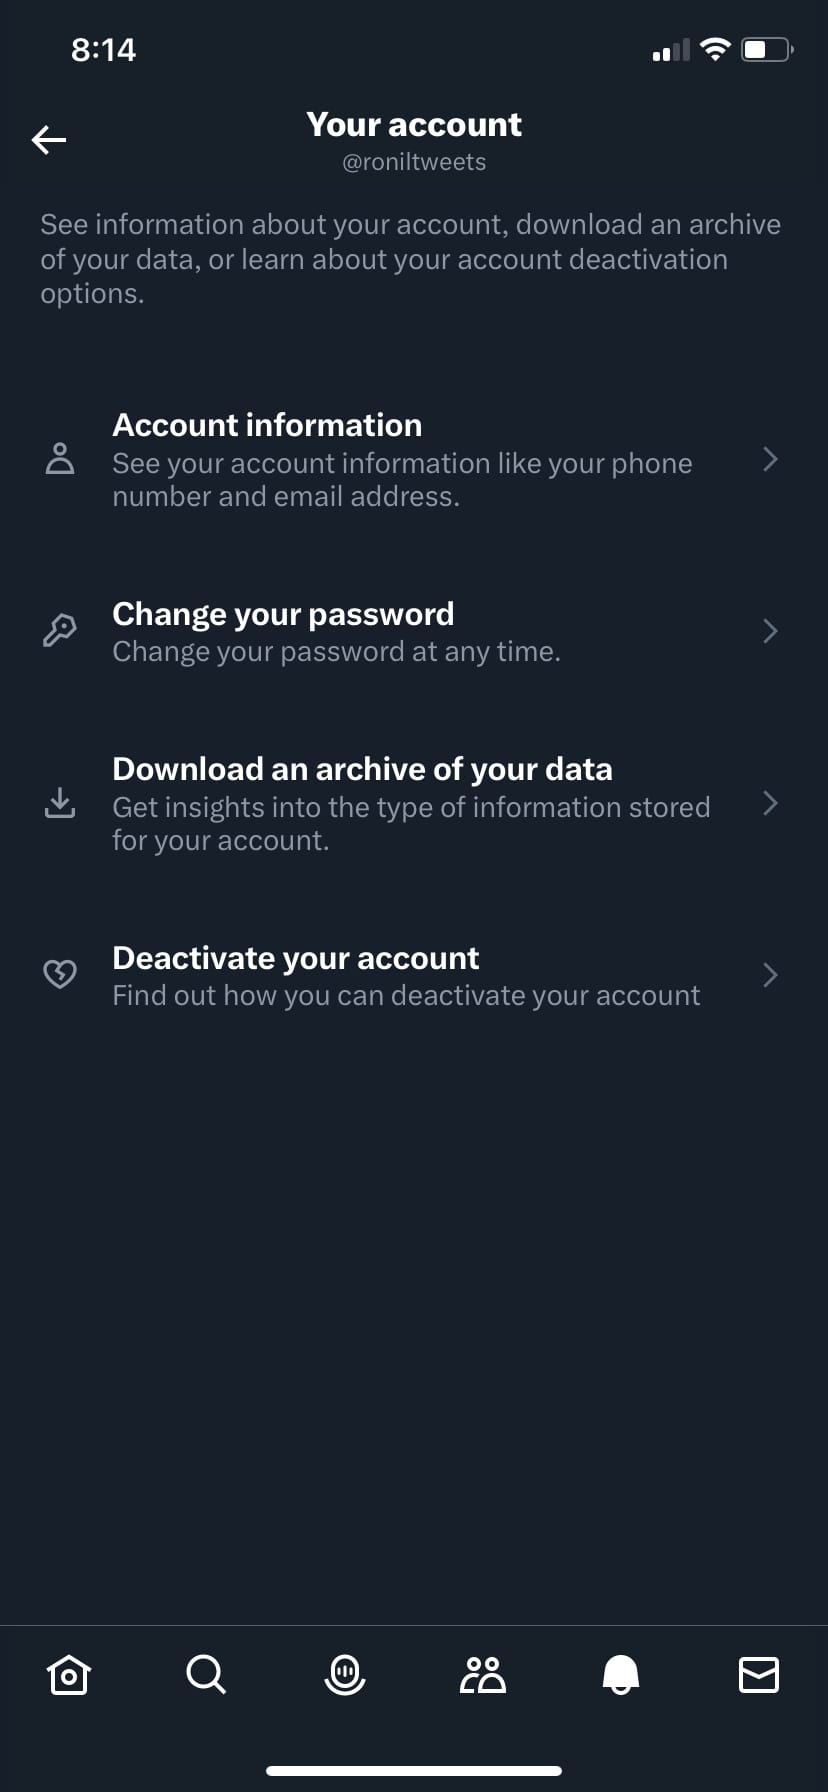 Twitter Download an archive of your data option